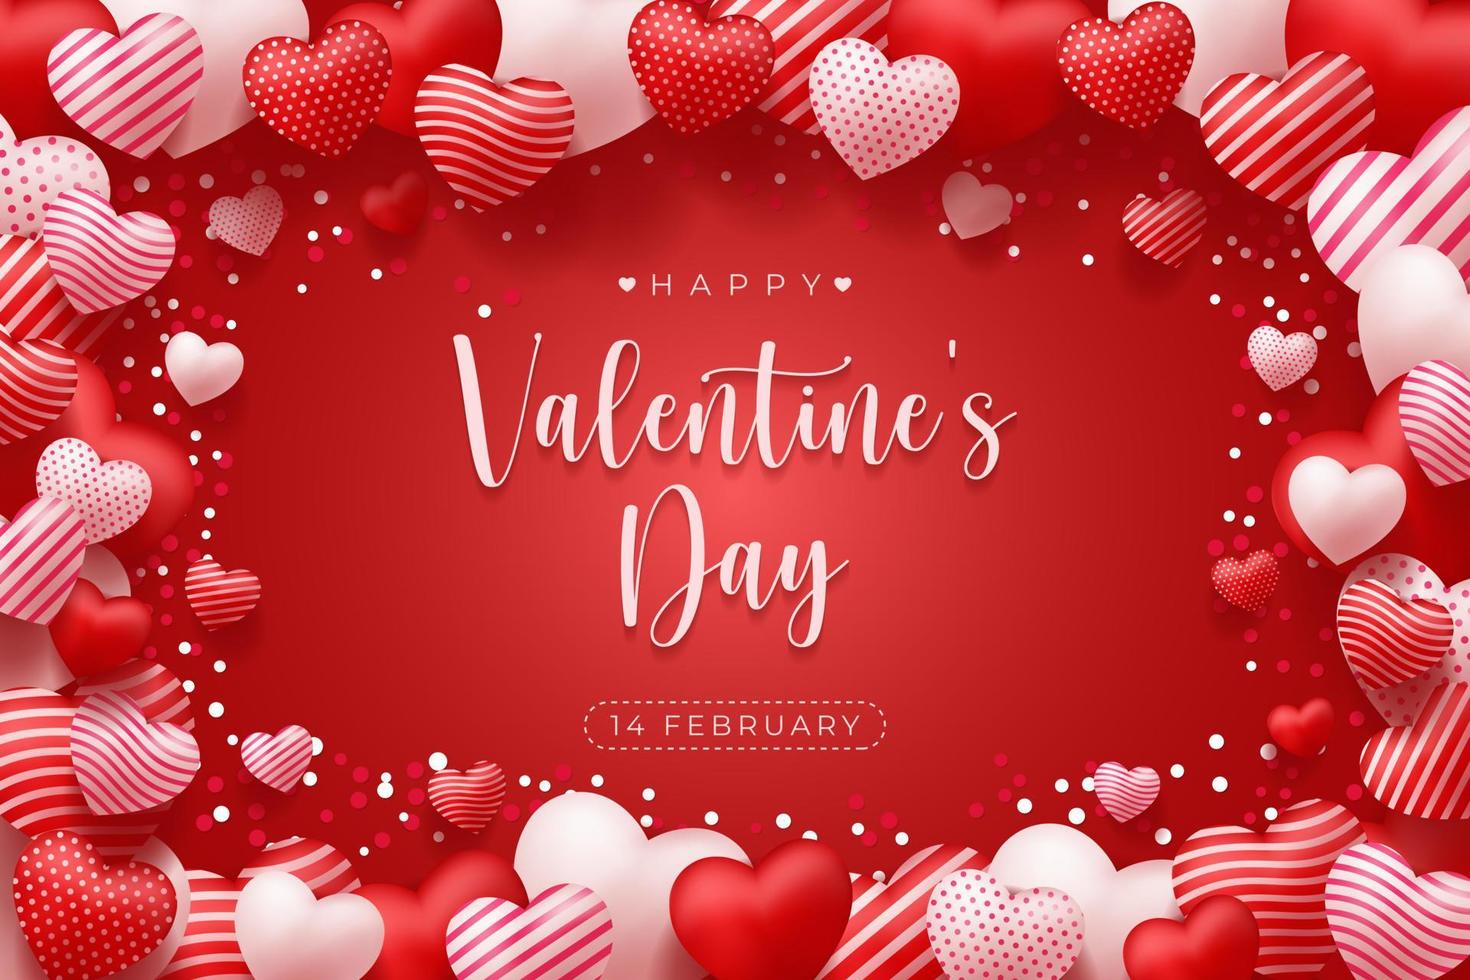 Lovely happy valentines day red background with realistic 3d hearts frame design for greeting card, poster, banner. Vector illustration.